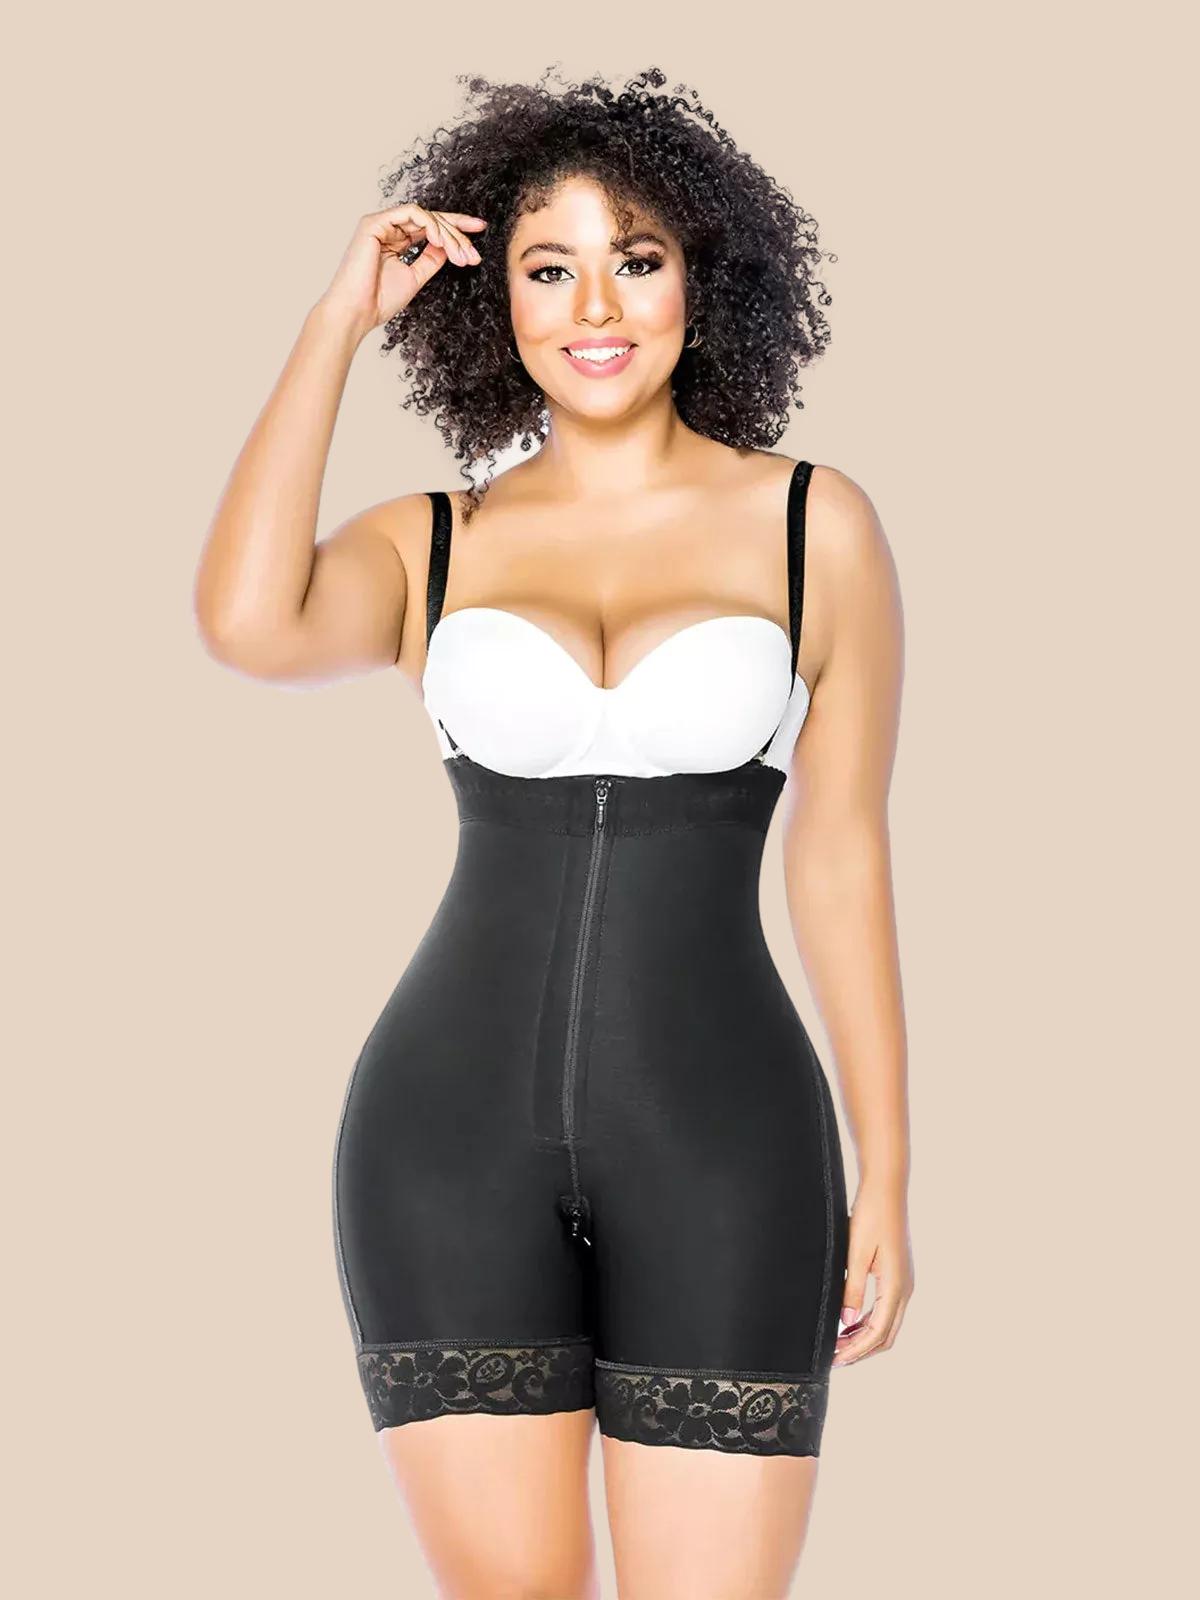 ChicCurve Women's Fajas Colombianas Butt Lifter Shapewear RM7 Black Small  NWT